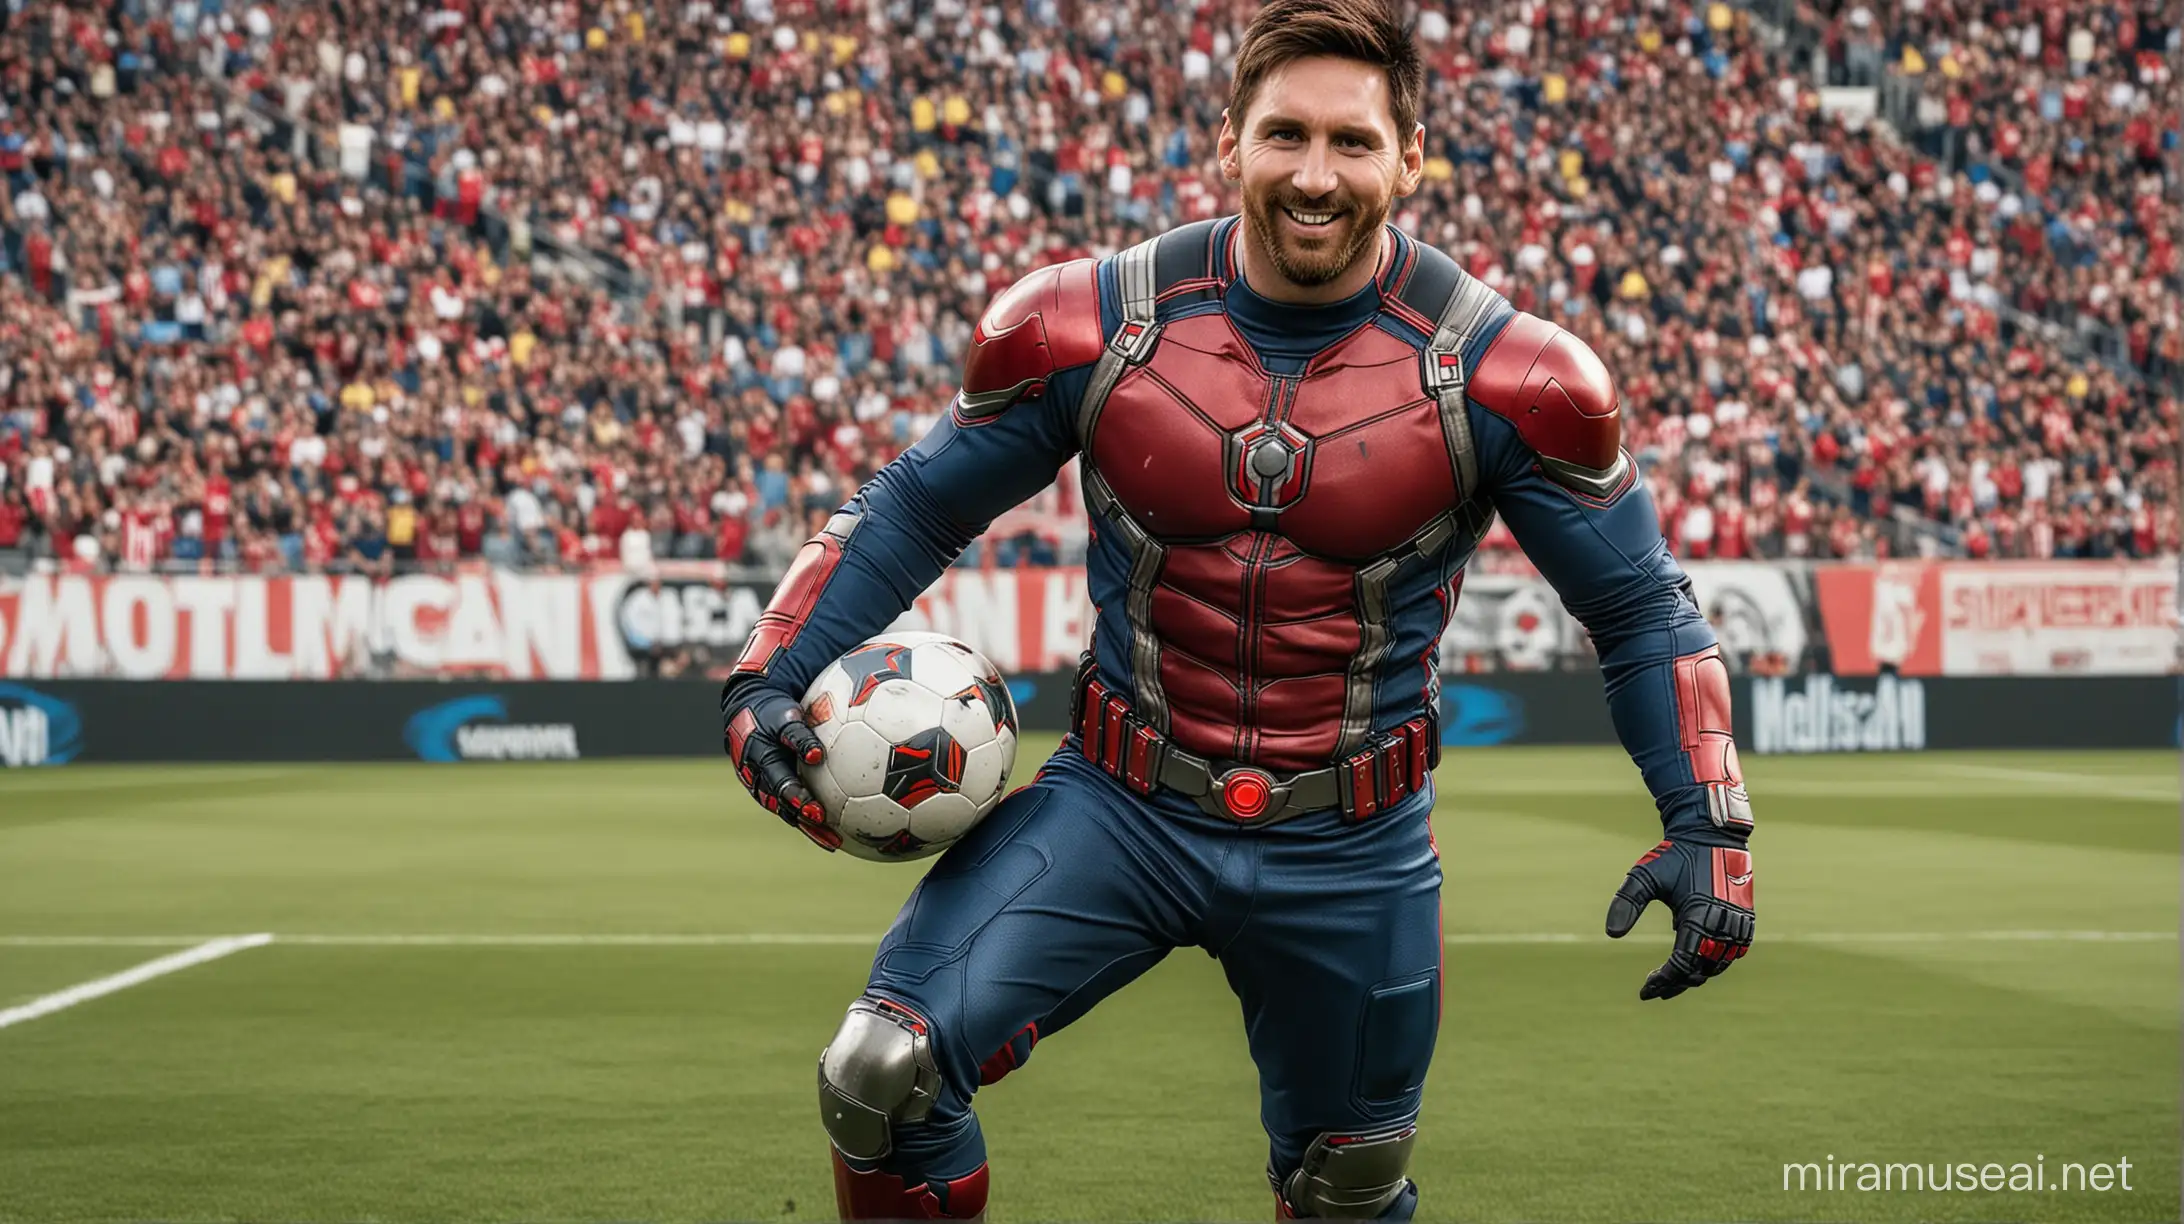 Lionel Messi as AntMan Soccer Superhero with Ball